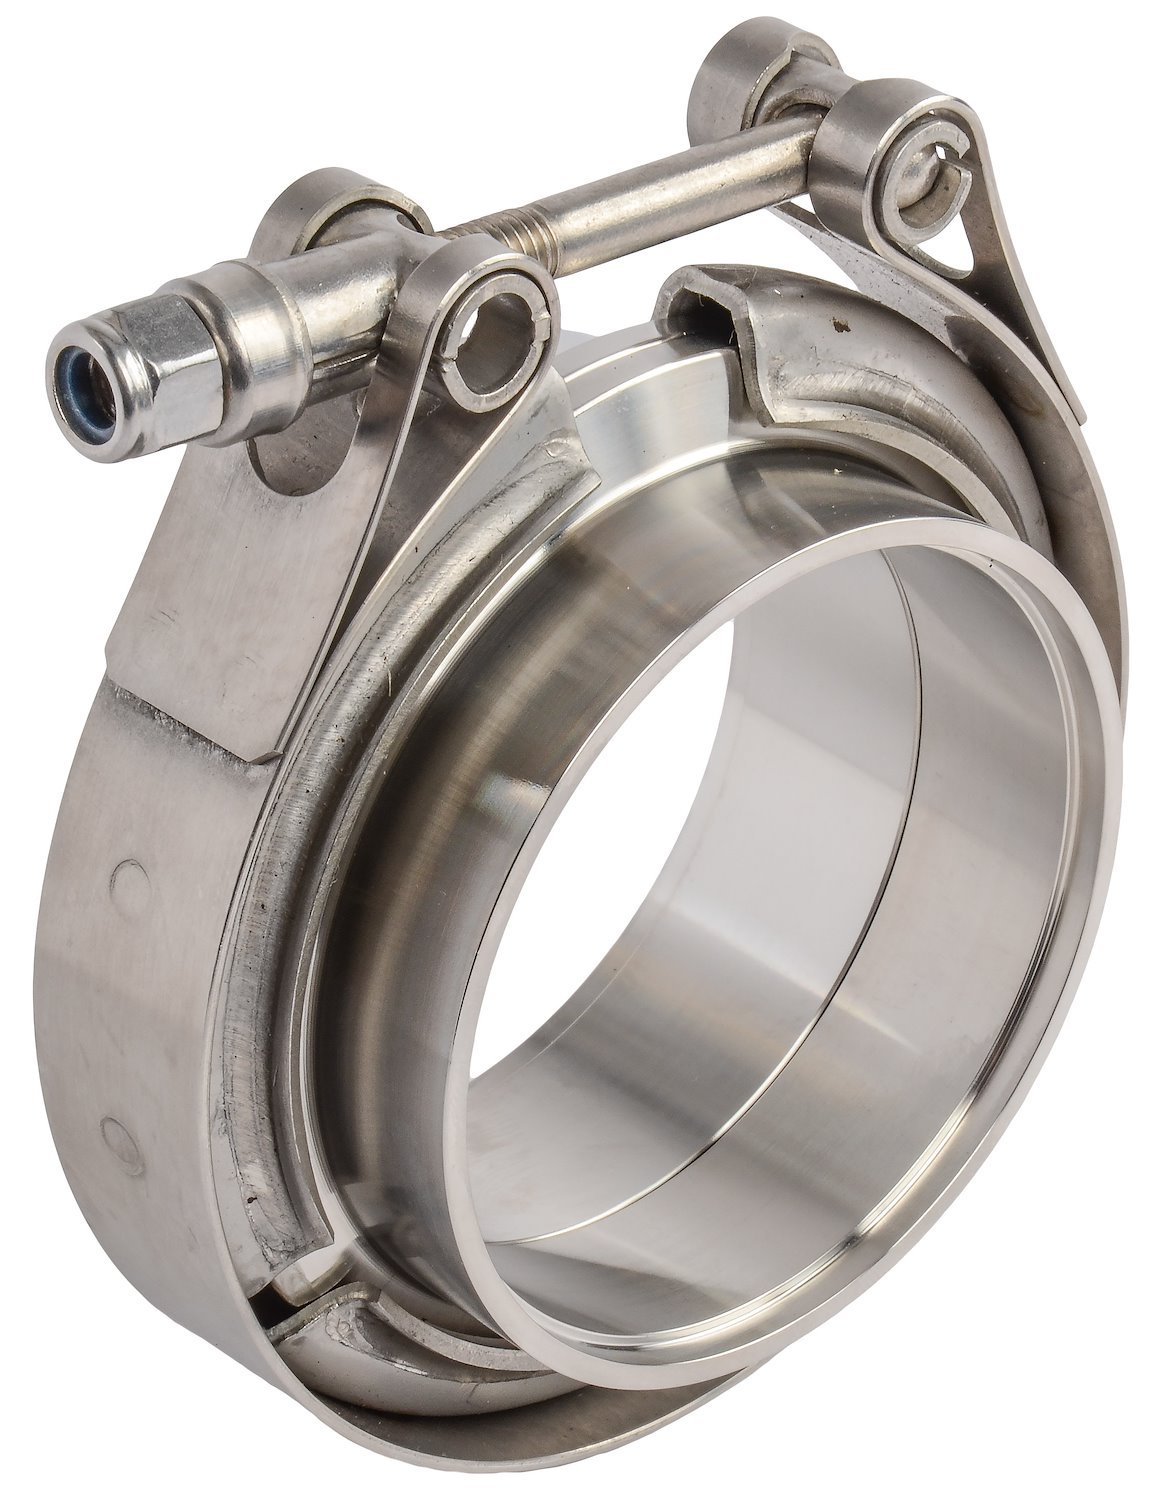 Stainless Steel Standard V-Band Clamp & Flange 2.500 in.